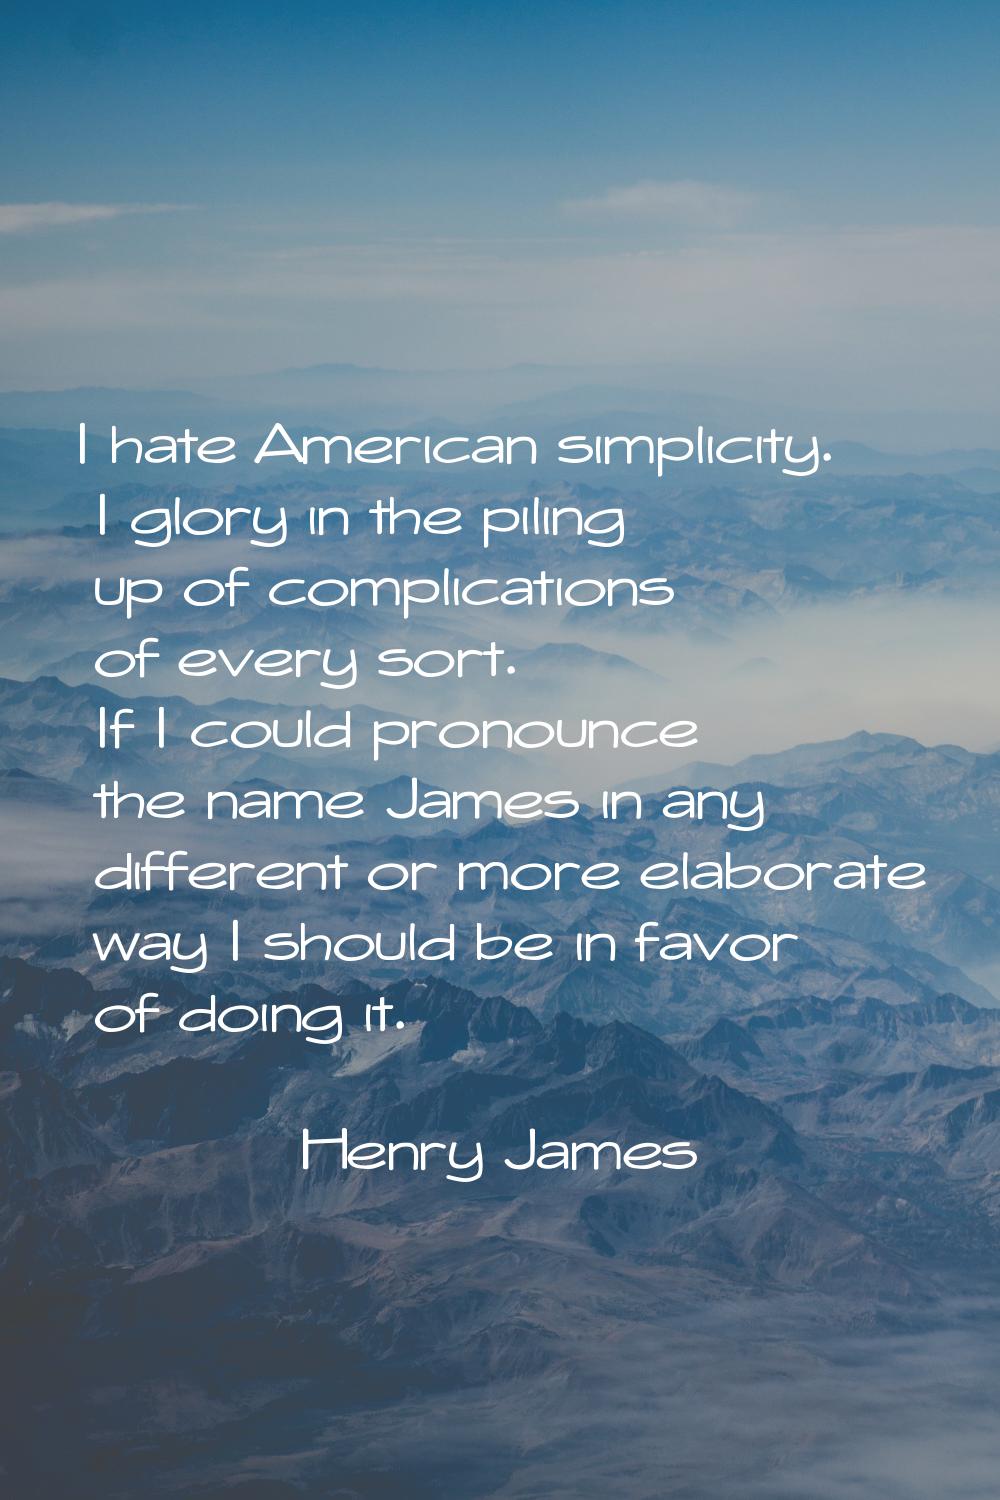 I hate American simplicity. I glory in the piling up of complications of every sort. If I could pro